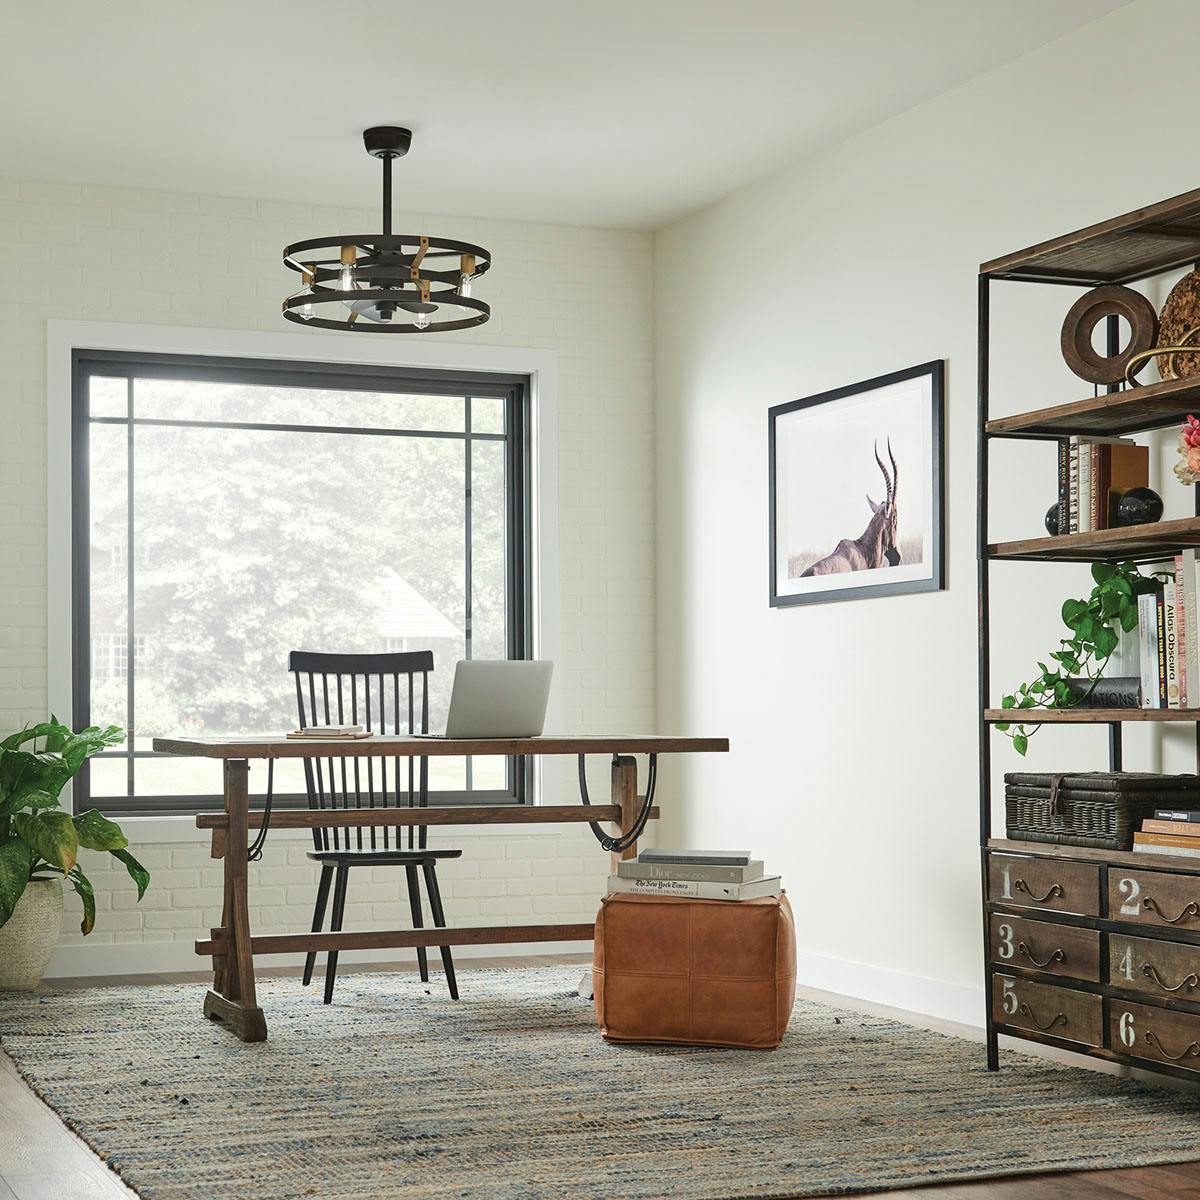 Day time office image featuring Cavelli ceiling fan 300040SNB